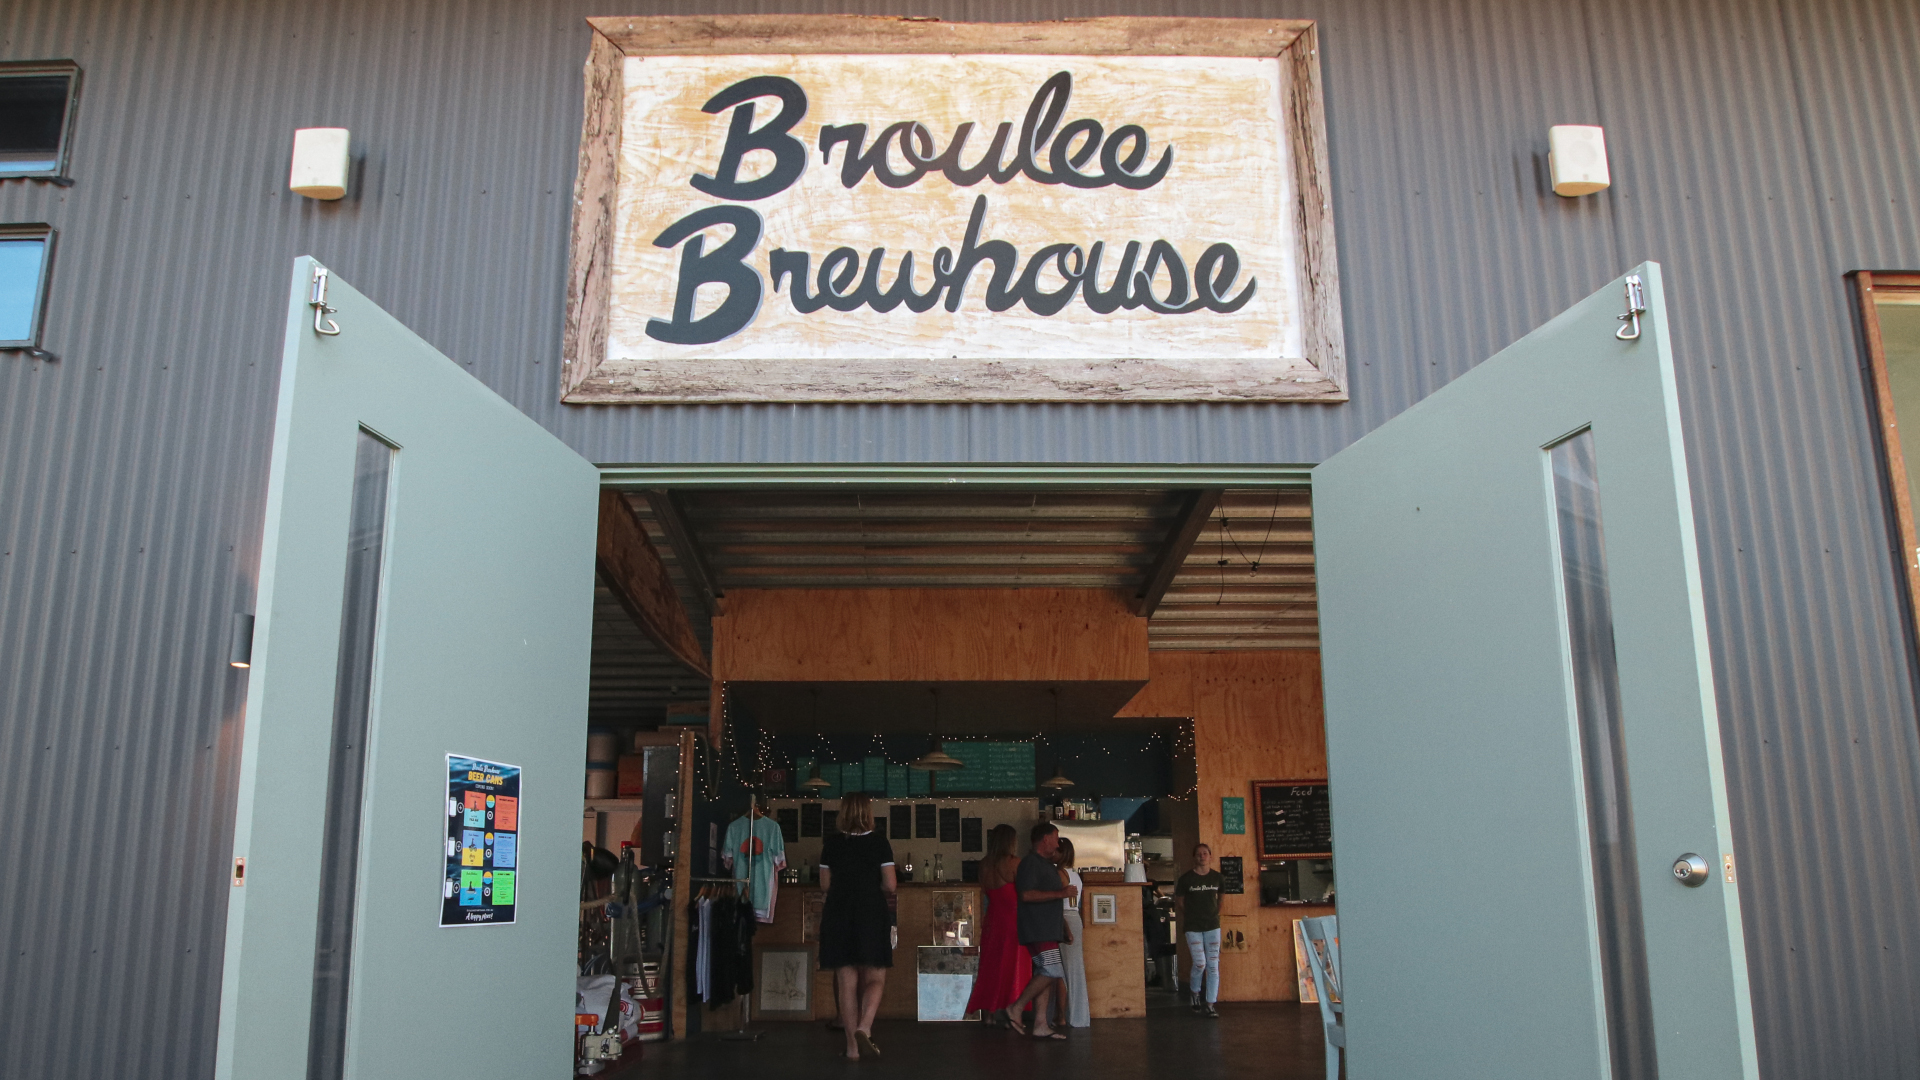 3 Broulee Brewhouse